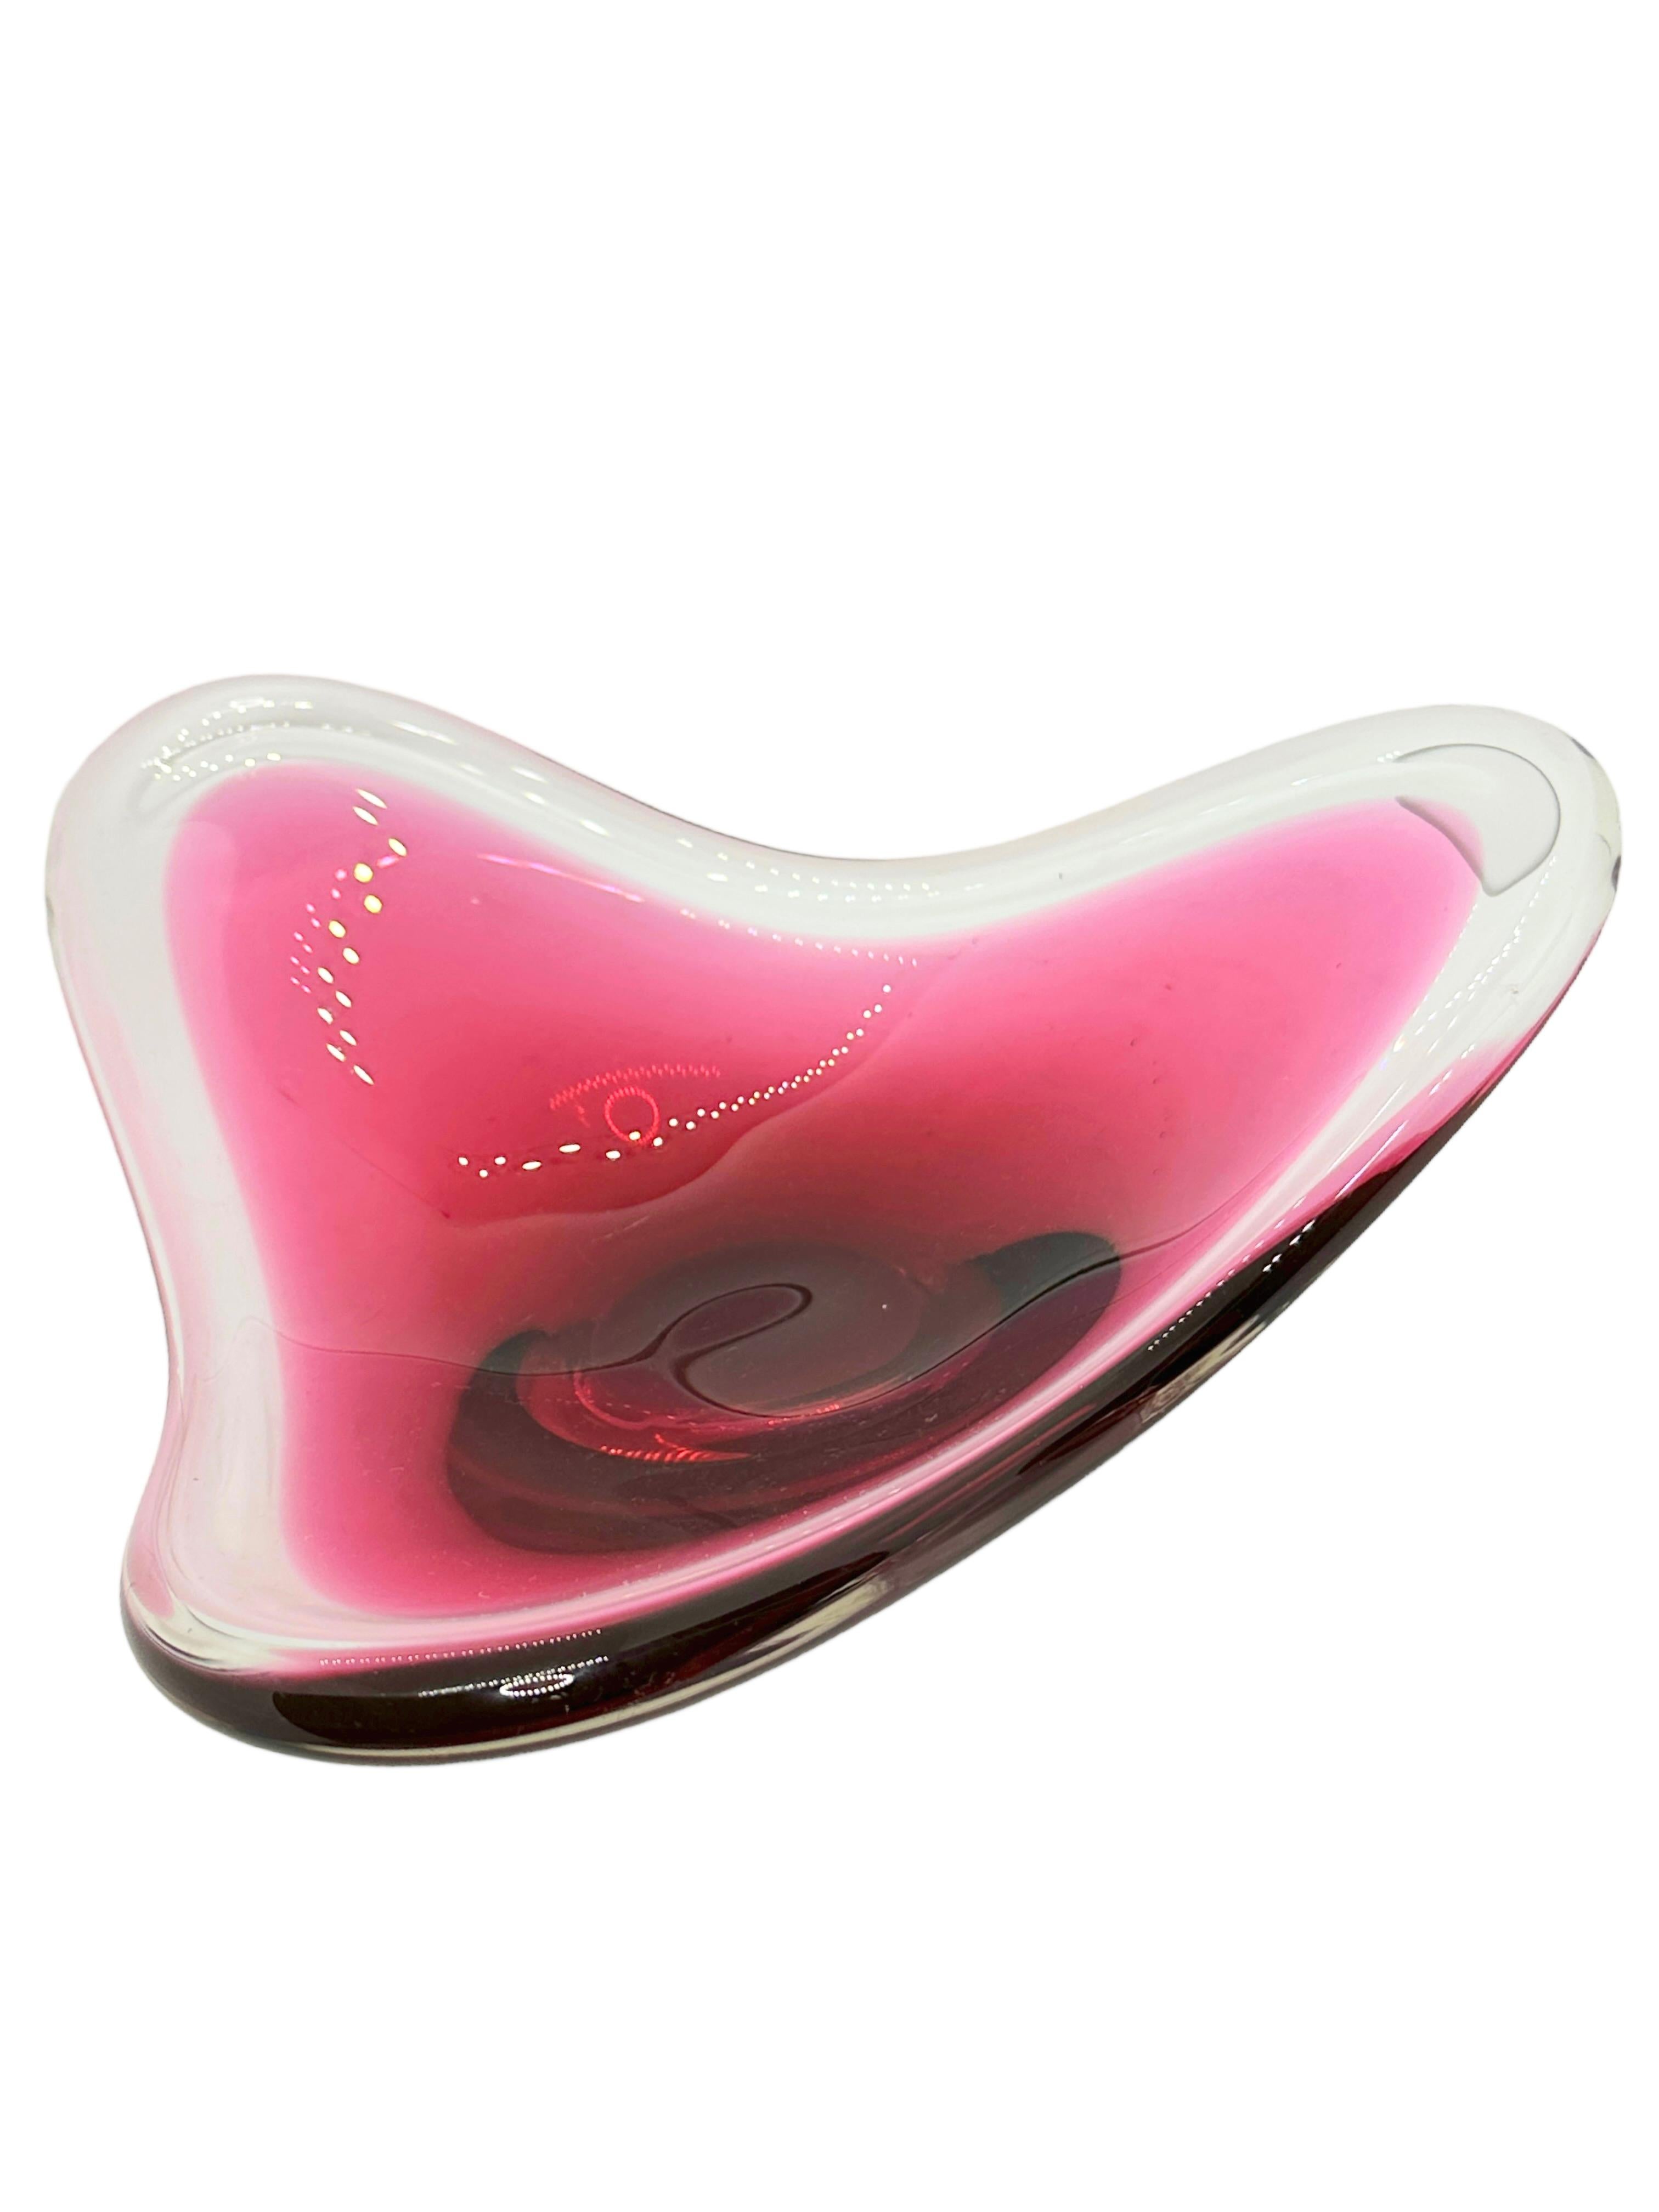 Mid-Century Modern Beautiful Pink and Clear Murano Glass Bowl Catchall Vintage, Italy, 1980s For Sale